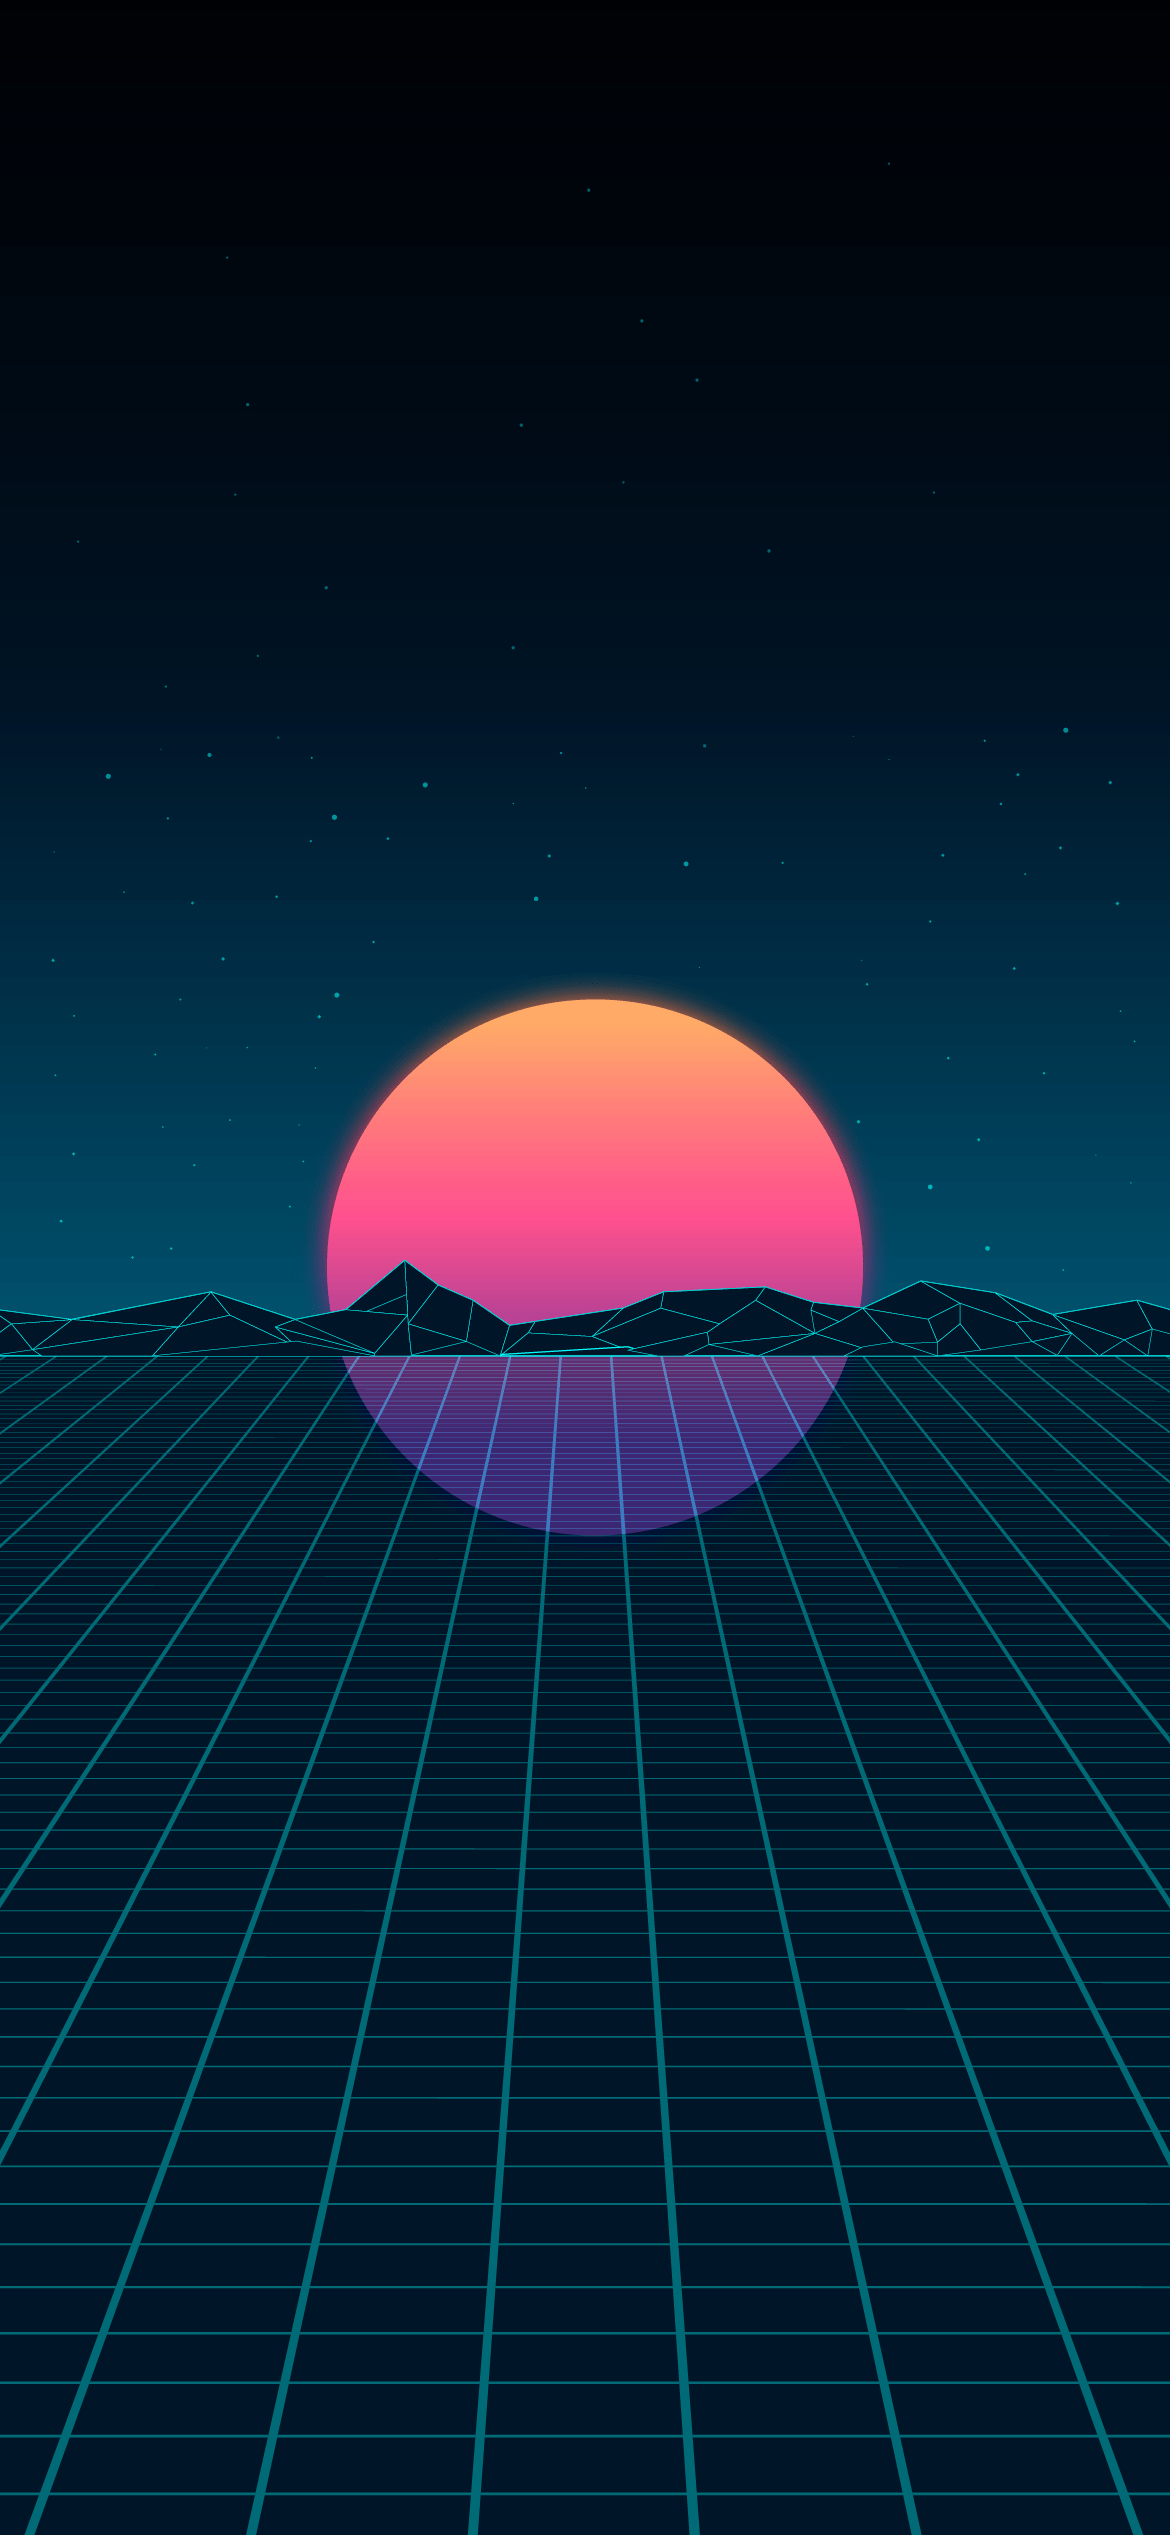 A retro style sunset with mountains in the background - Sun